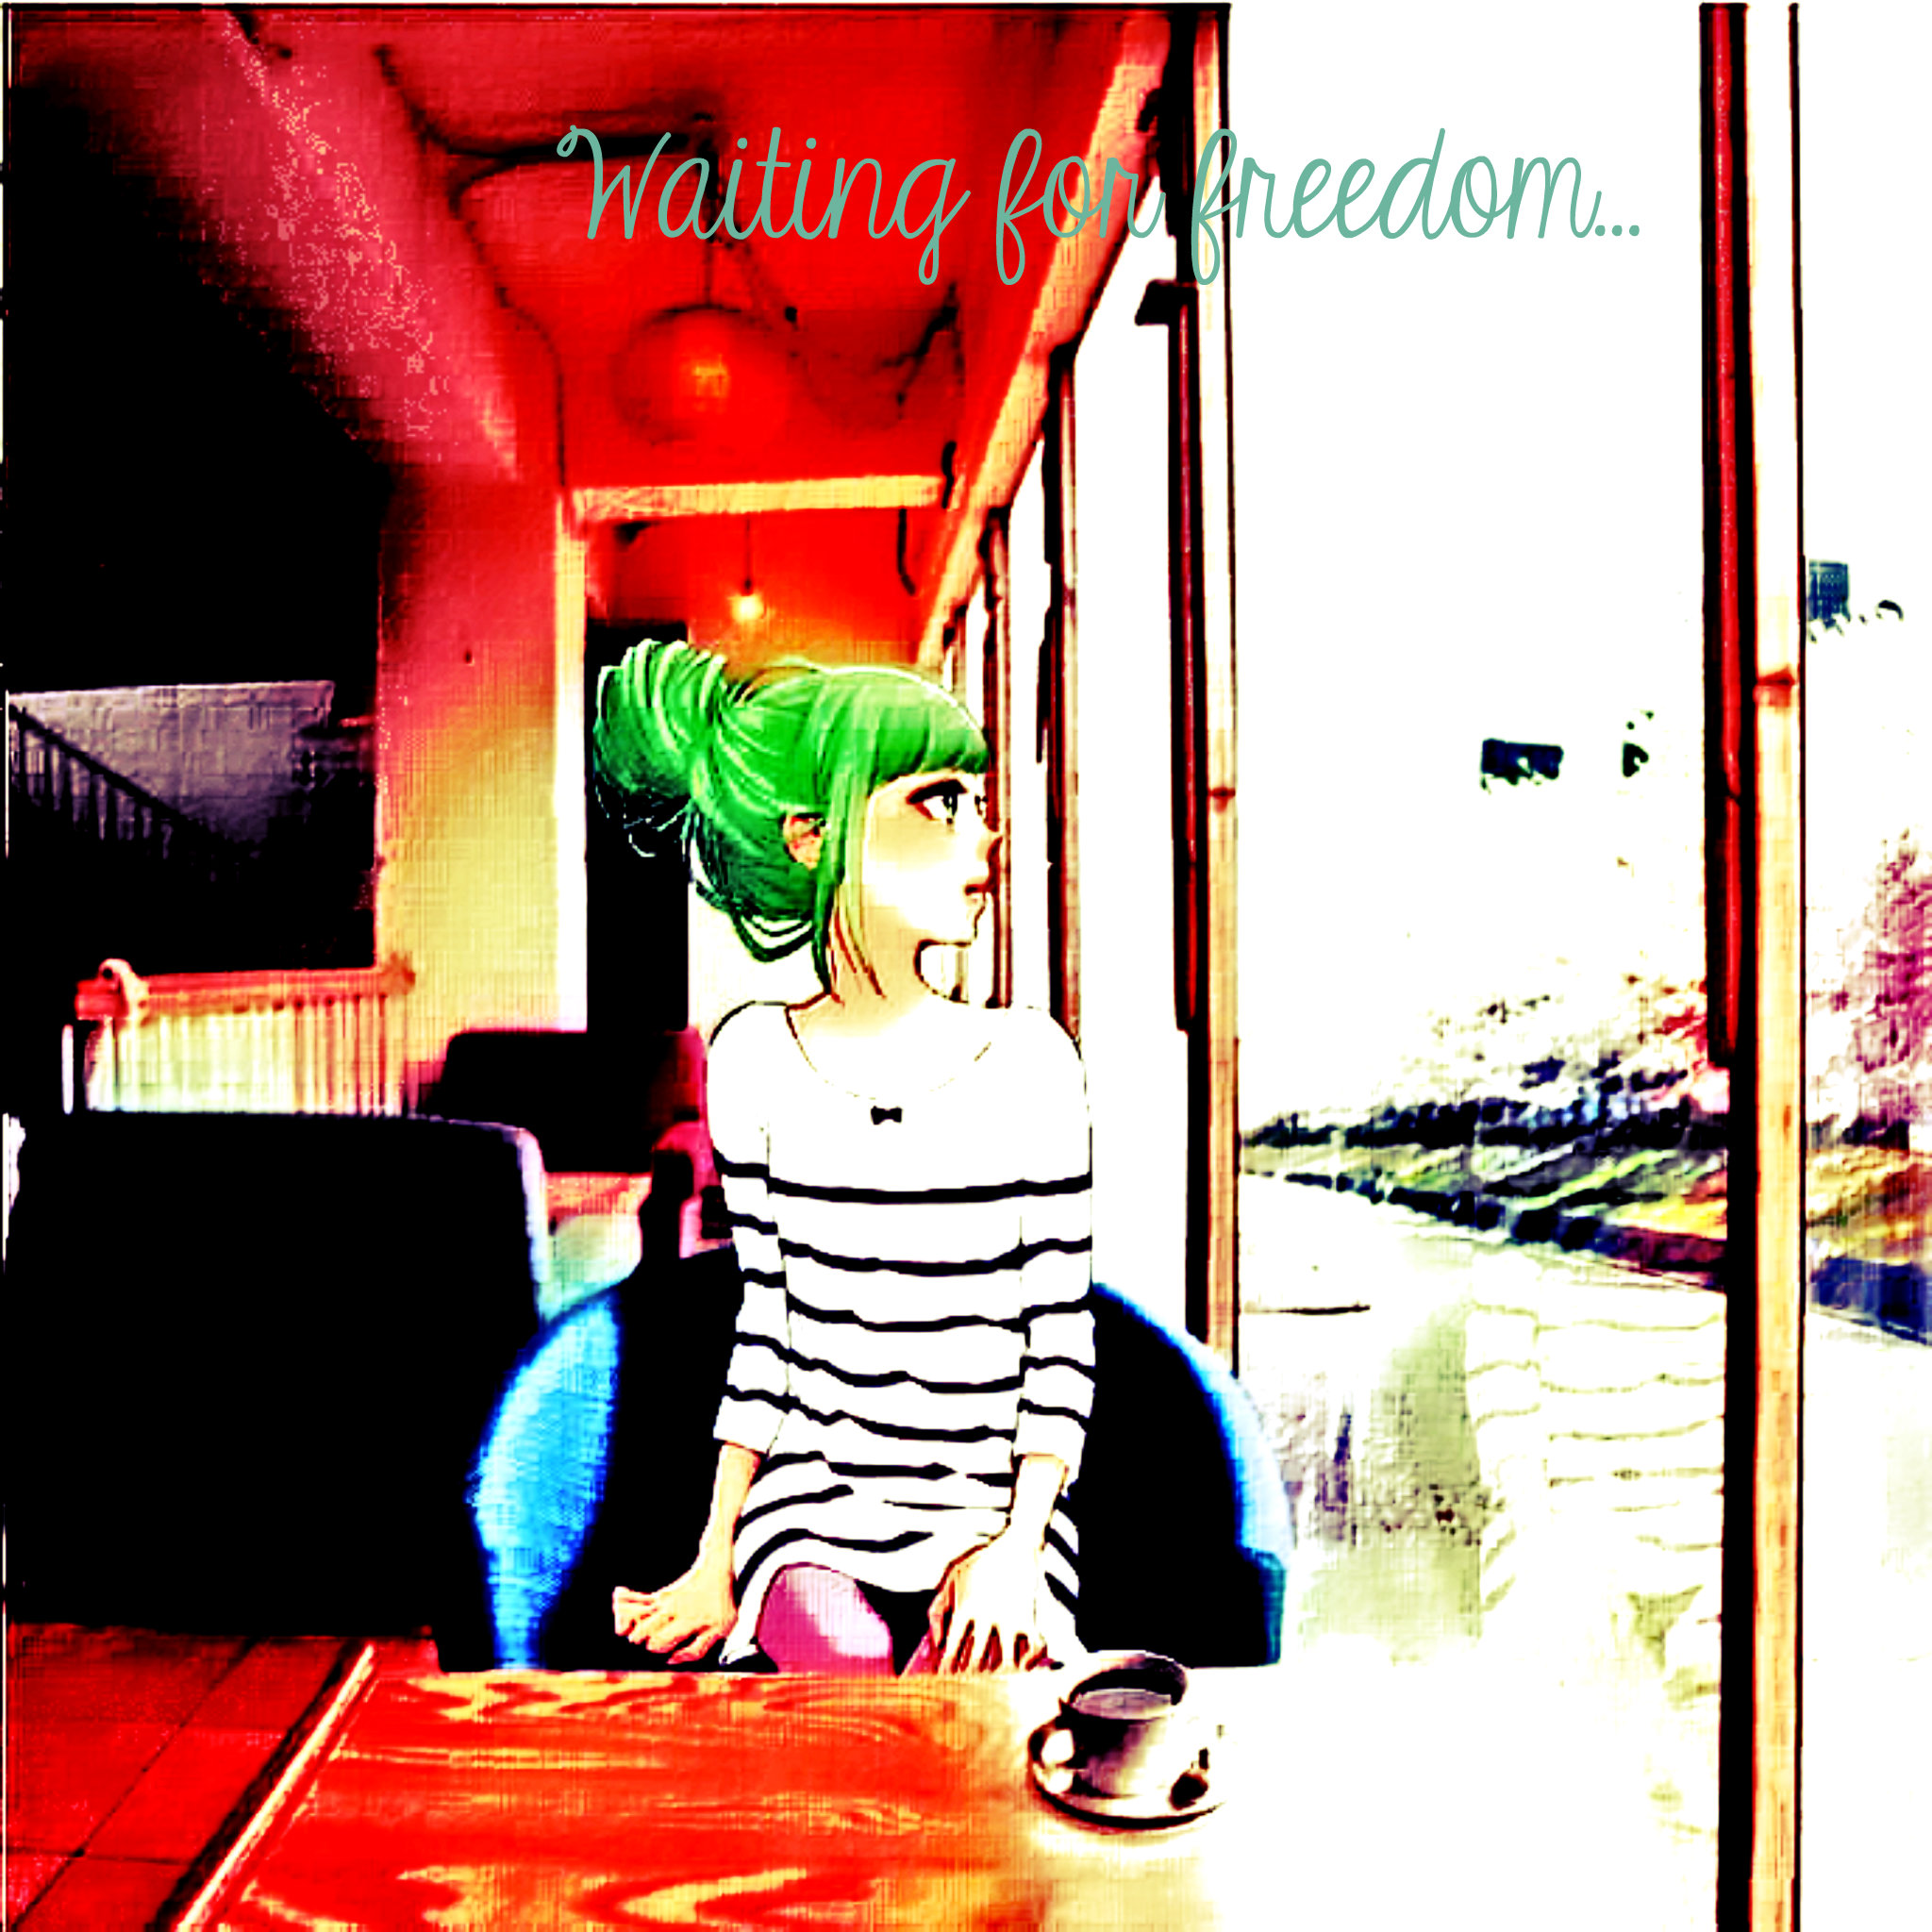 Waiting for freedom